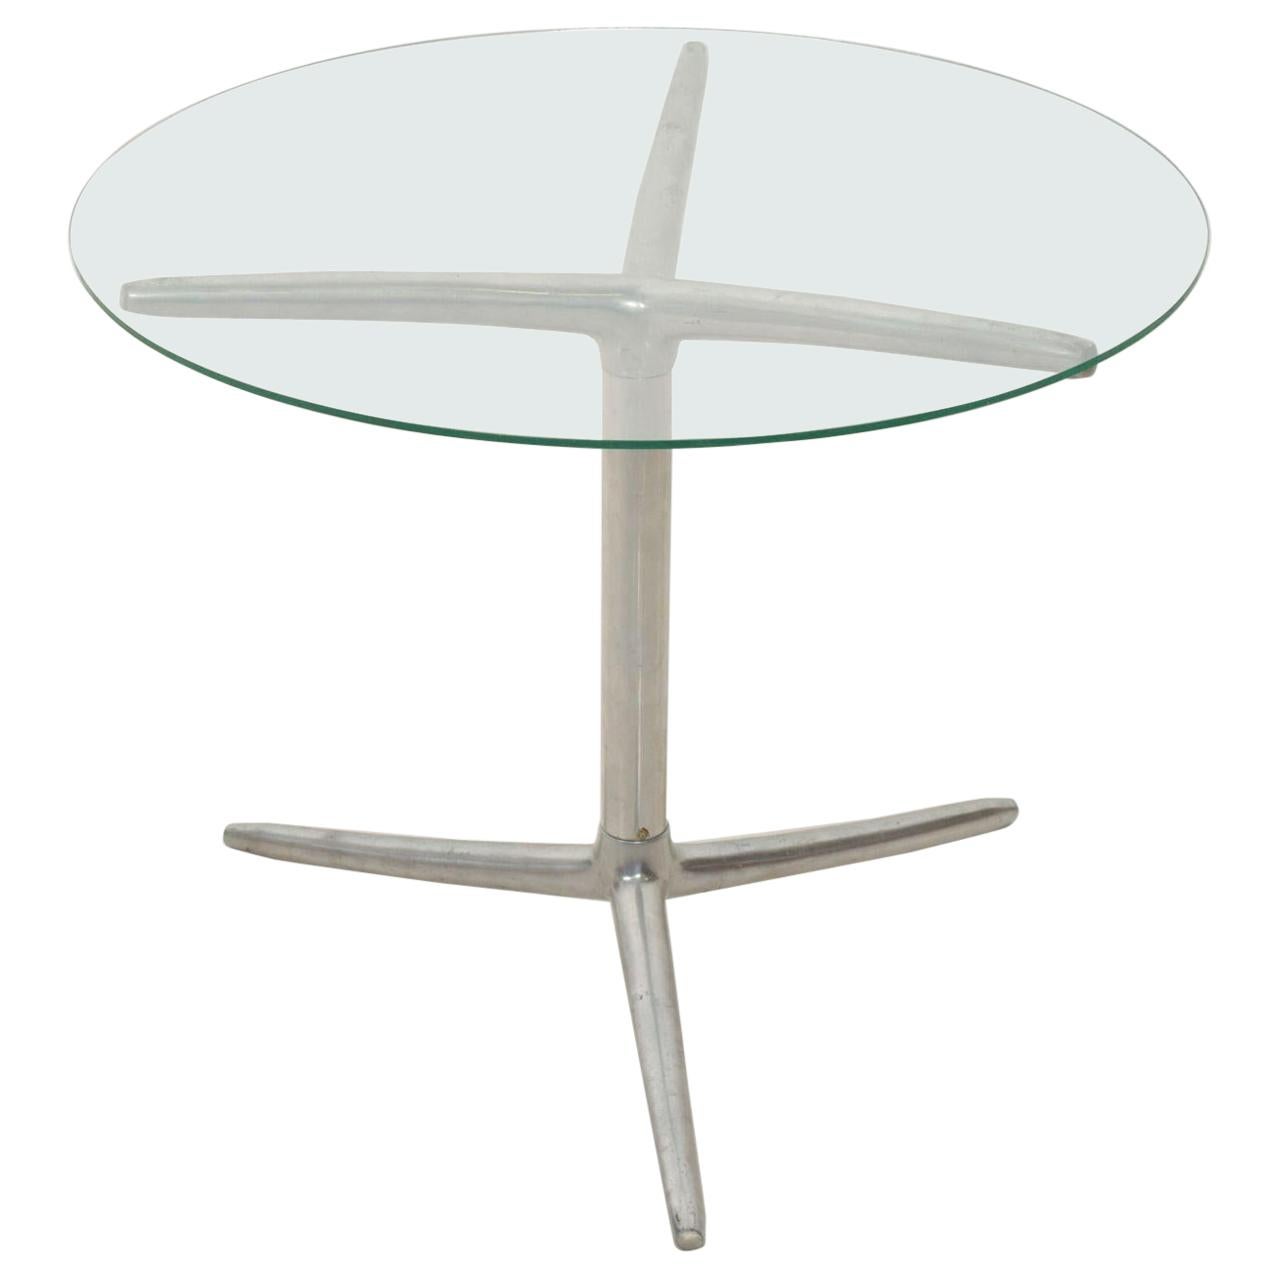 Midcentury Modern Aluminum Tripod Side Table Glass Top 1970s